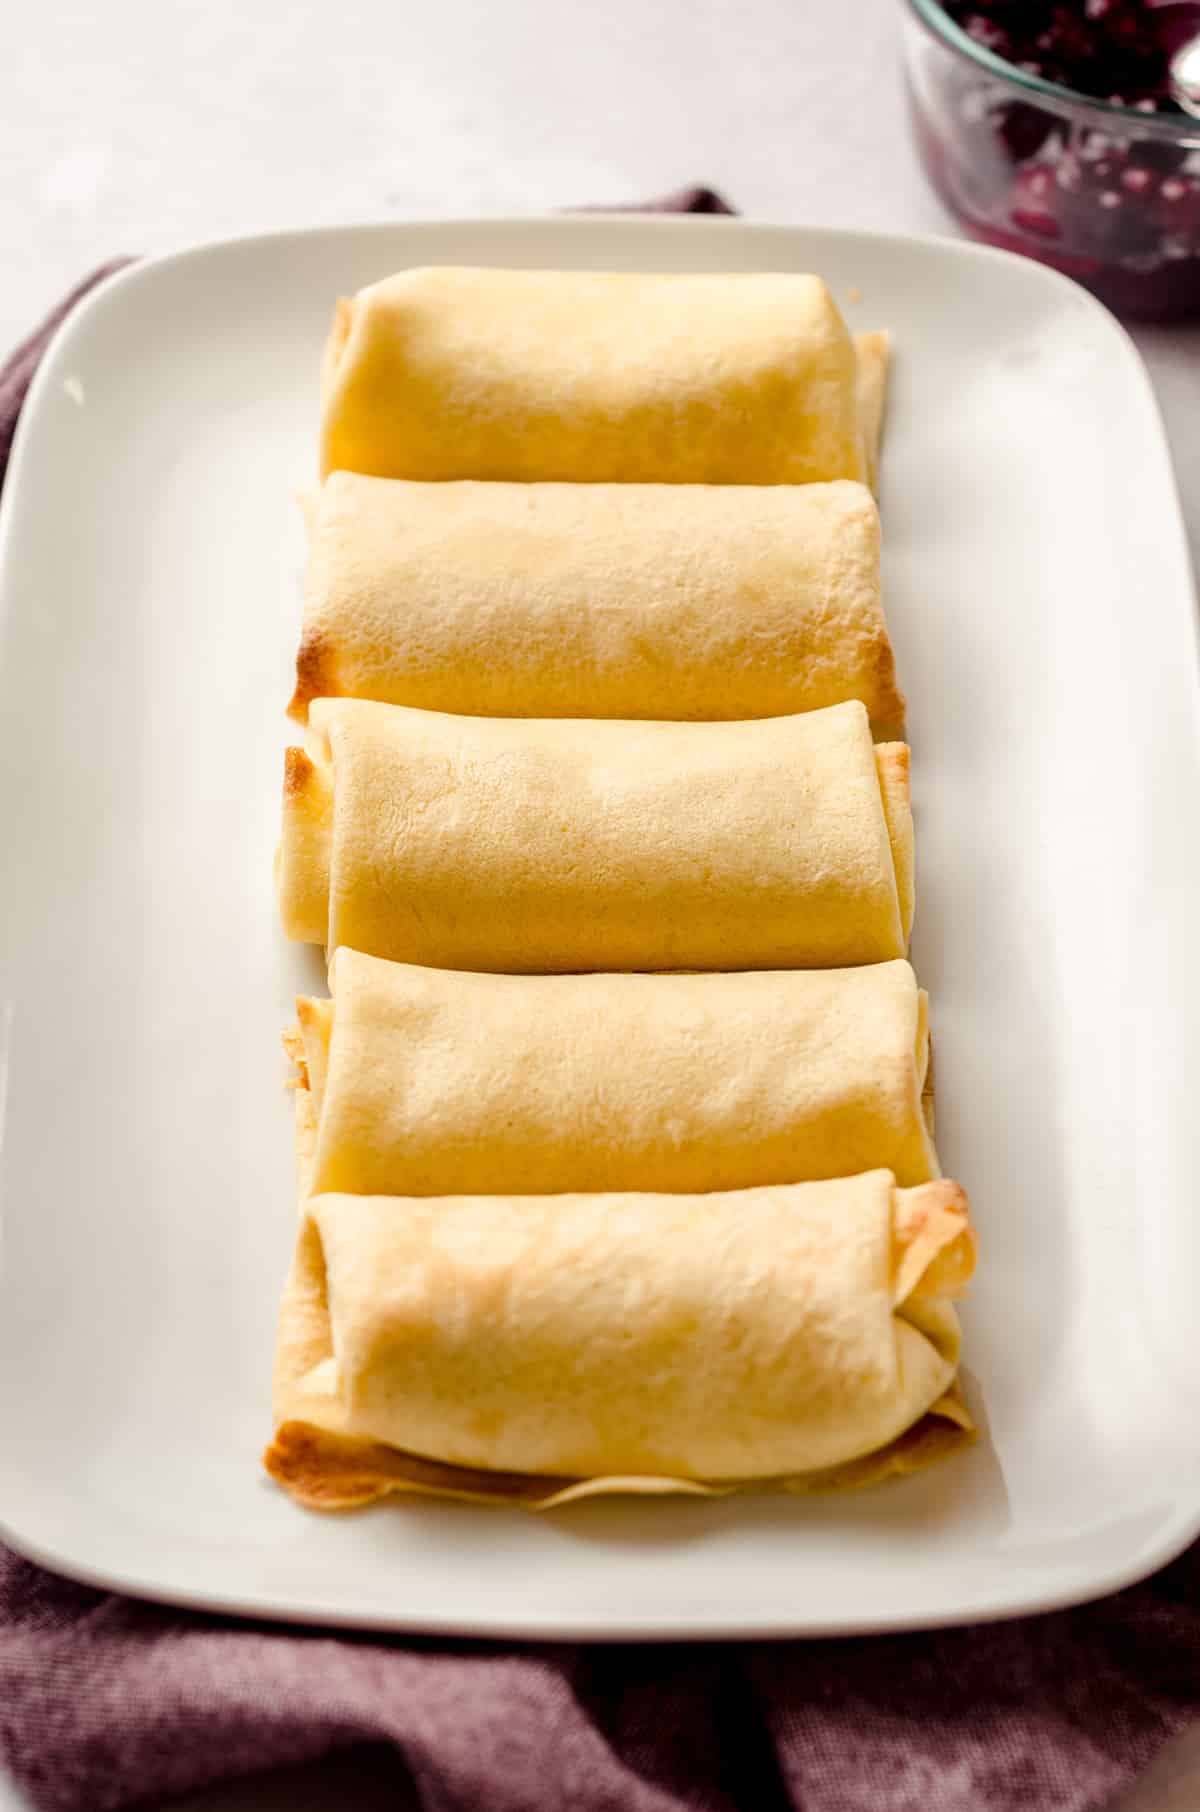 Baked cheese blintzes lined up on a platter.